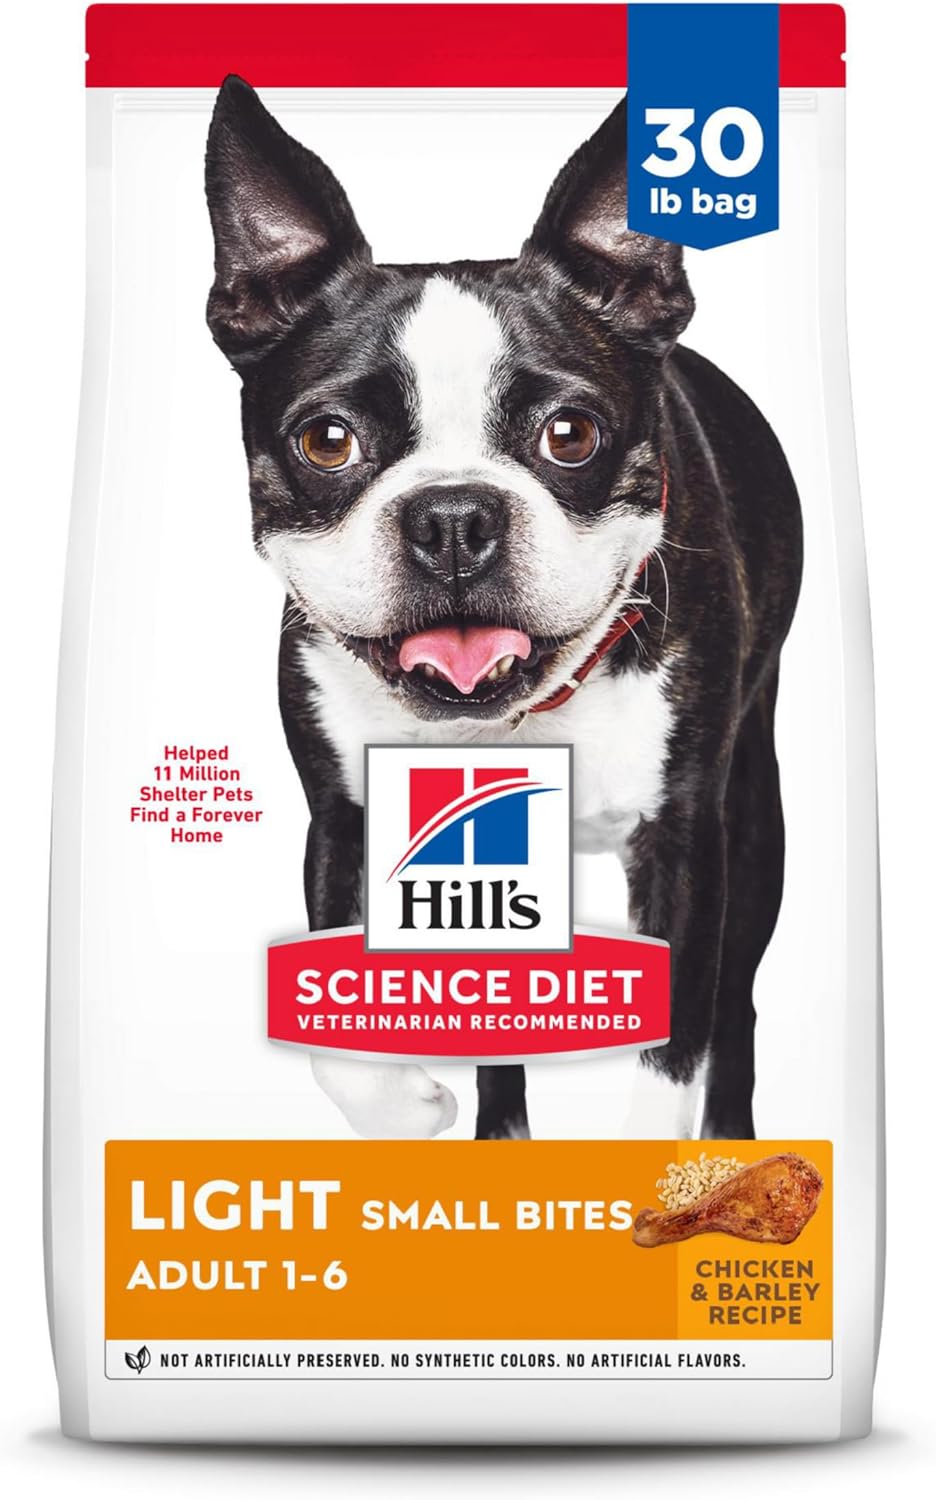 Hill's Science Diet Light , Adult 1-6, Weight Management Support, Small Kibble, Dry Dog Food, Chicken & Barley, 30 lb Bag